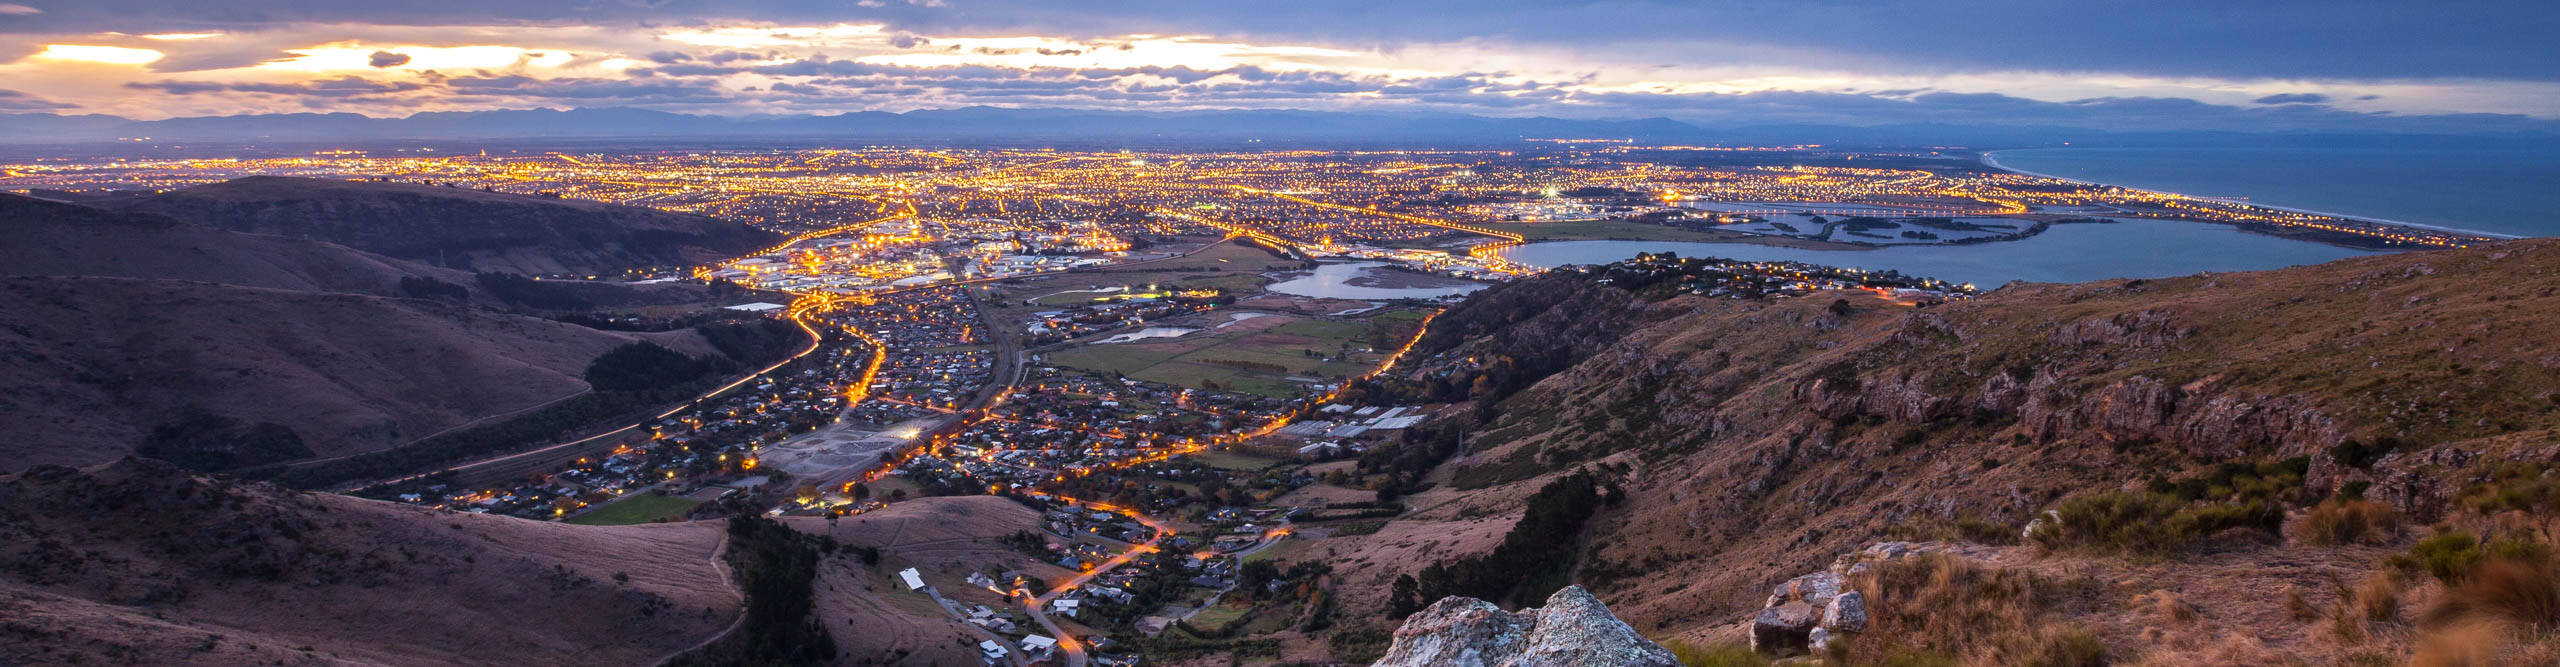 View of Christchurch city from Mount Pleasant at dusk, South Island, New Zealand